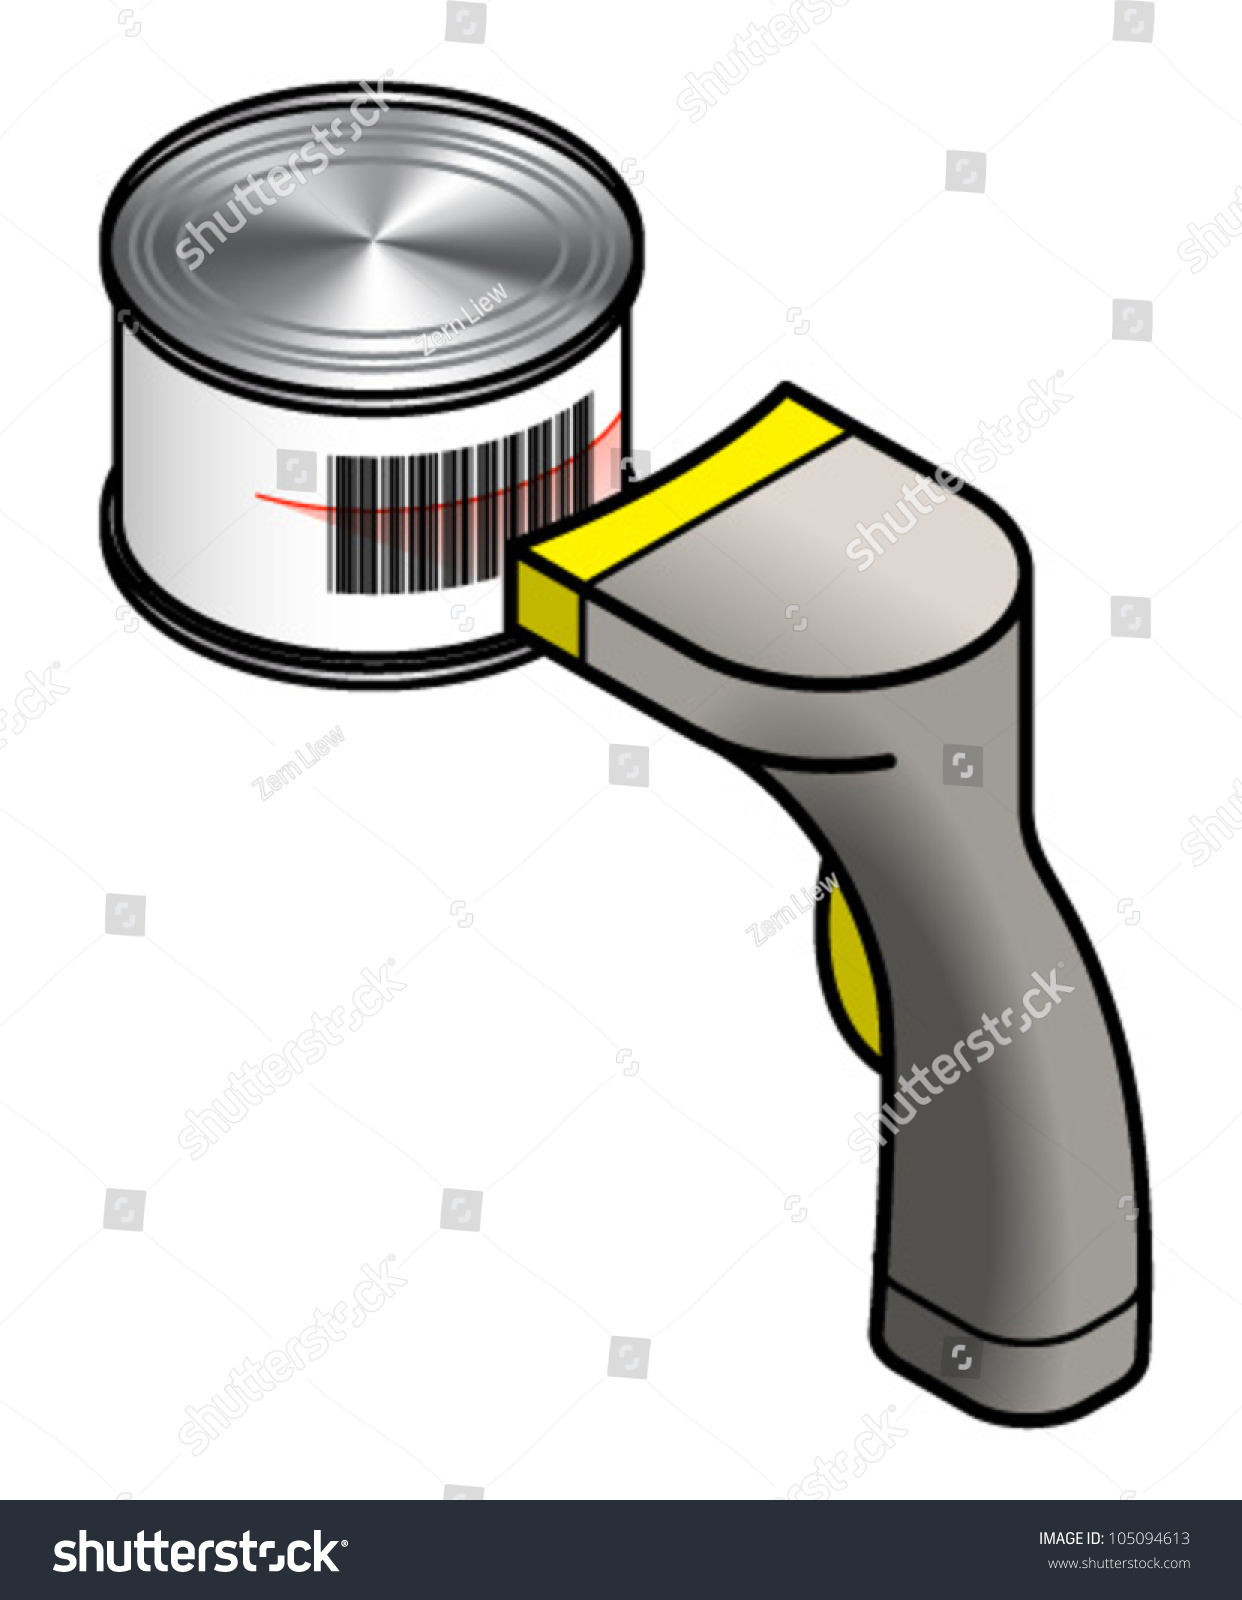 barcode scanner clipart - photo #10